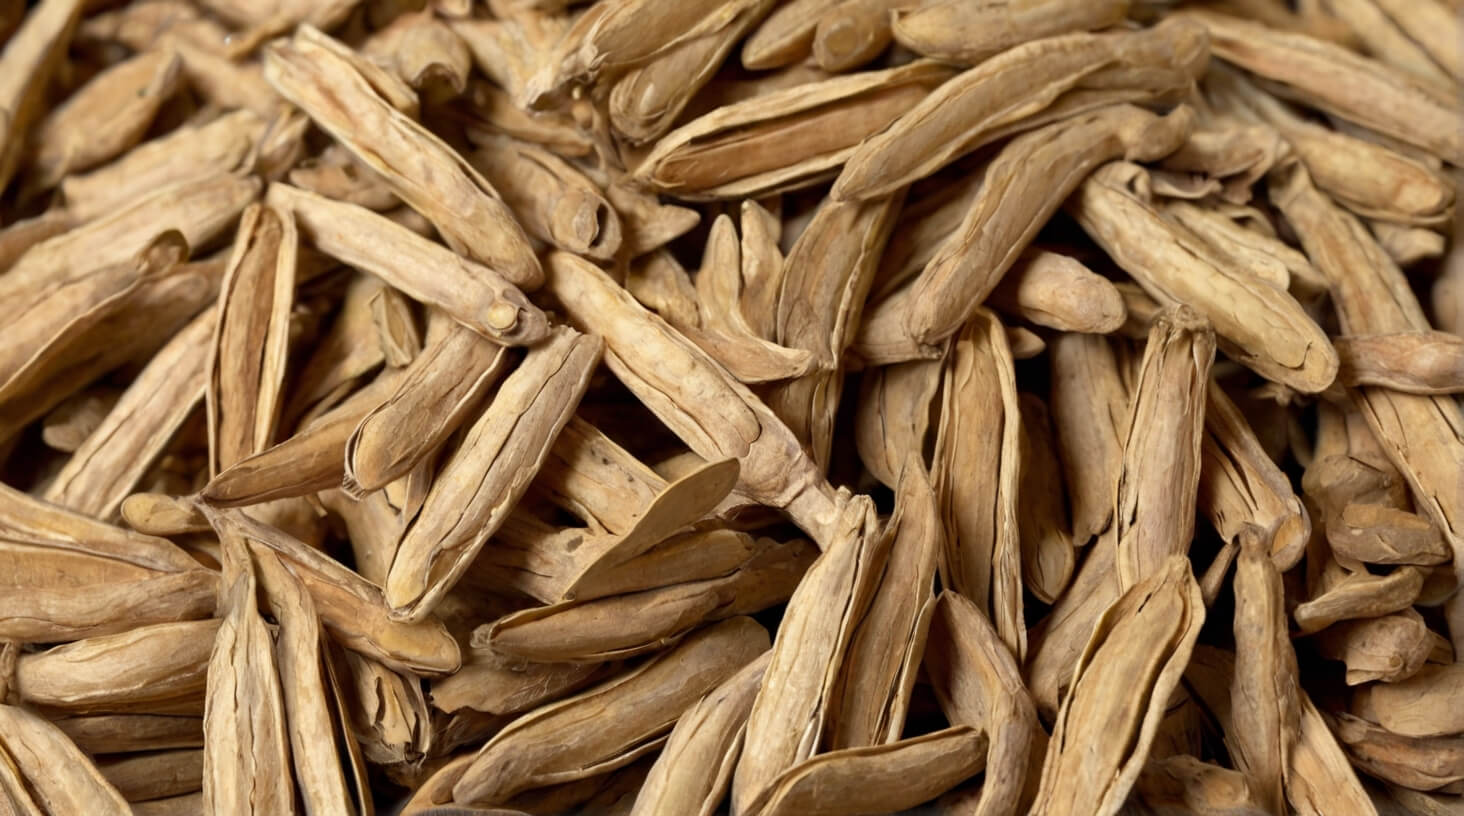 Close-up image of dried Astragalus root, a traditional Chinese herb known for its medicinal properties.